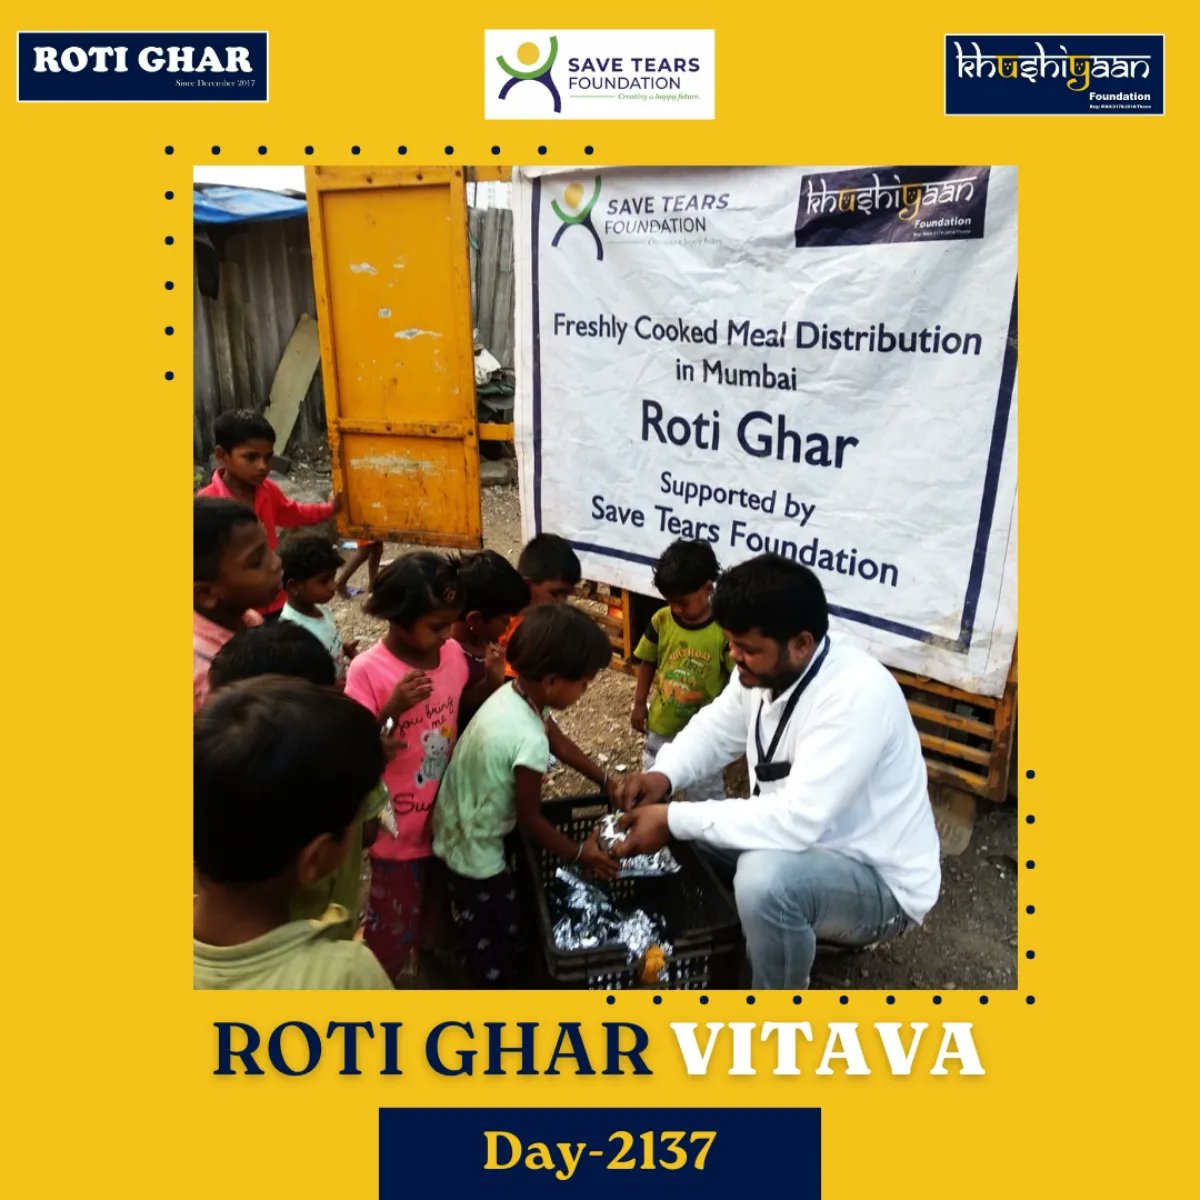 Date : 21-10-2023 Location : Delhi Valsad Vitava Odisha Roti Ghar : Day 2137 'The highest of distinctions is service to others' Be kind to everyone and spread happiness across! . #upliftingsociety #helpingothers #feedingkids #hungerfree #Hungerfreeindia #Kidsofrotighar